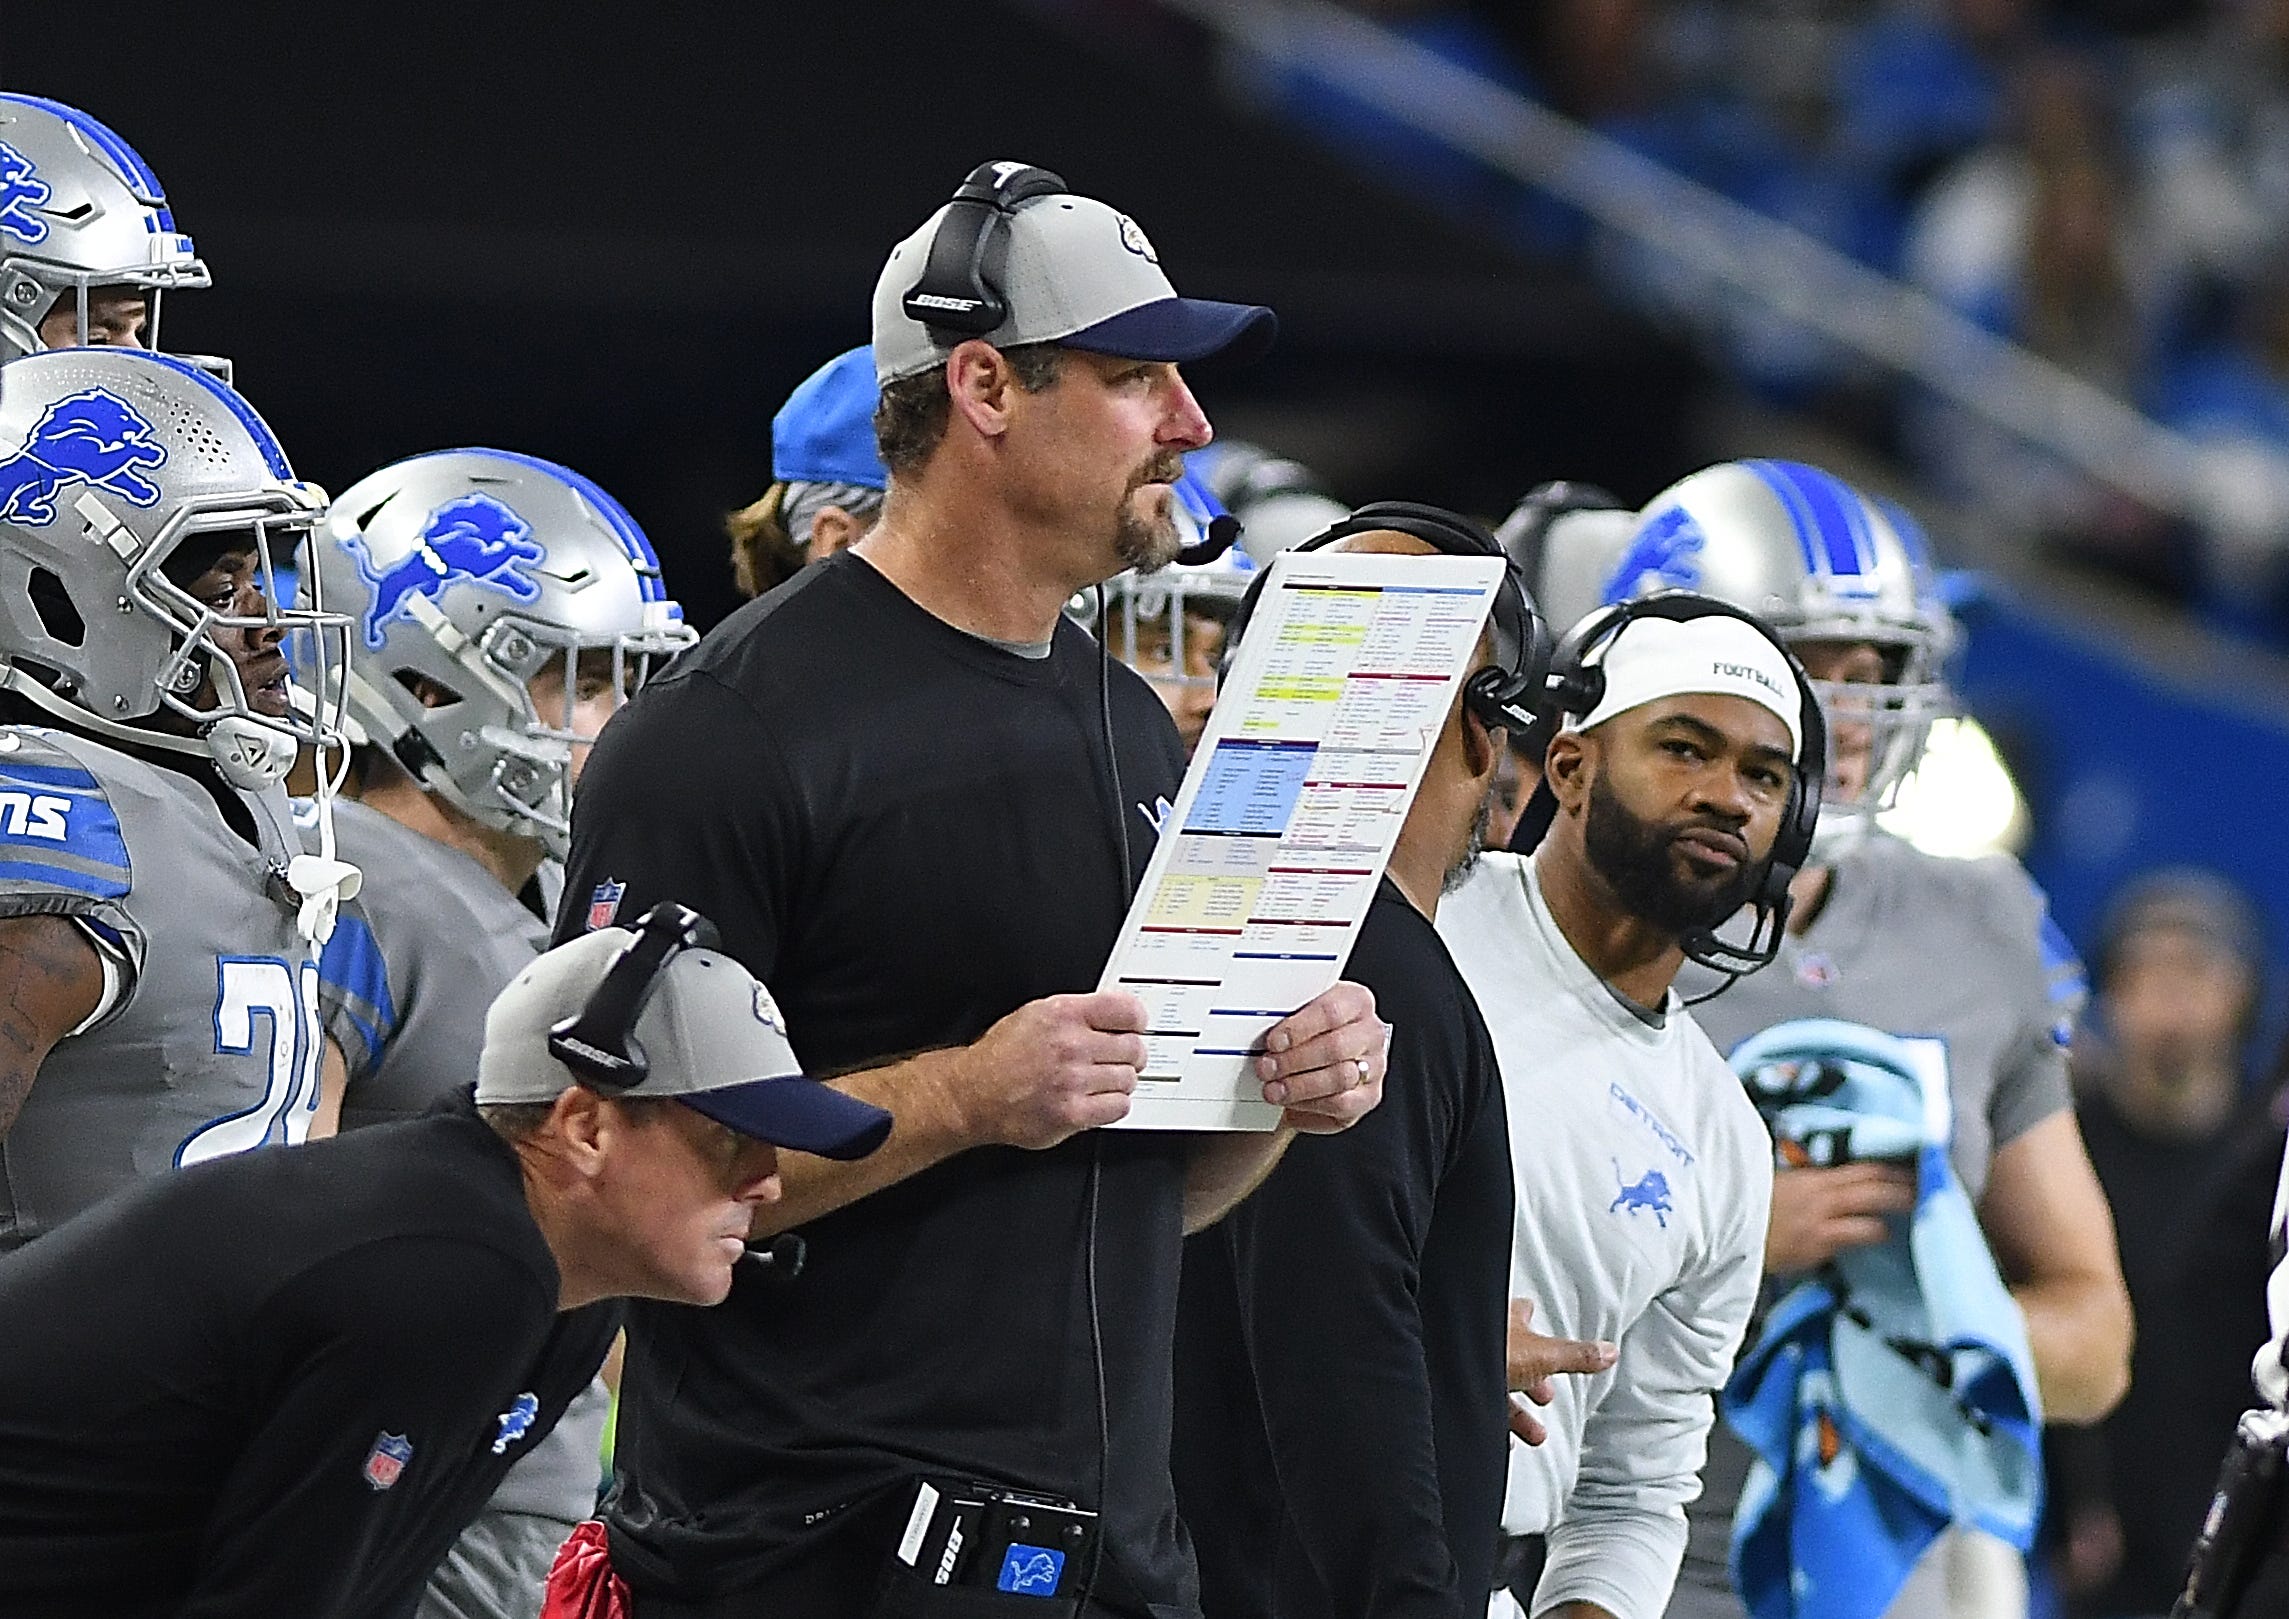 Lions head coach Dan Campbell on the sidelines in the third quarter.